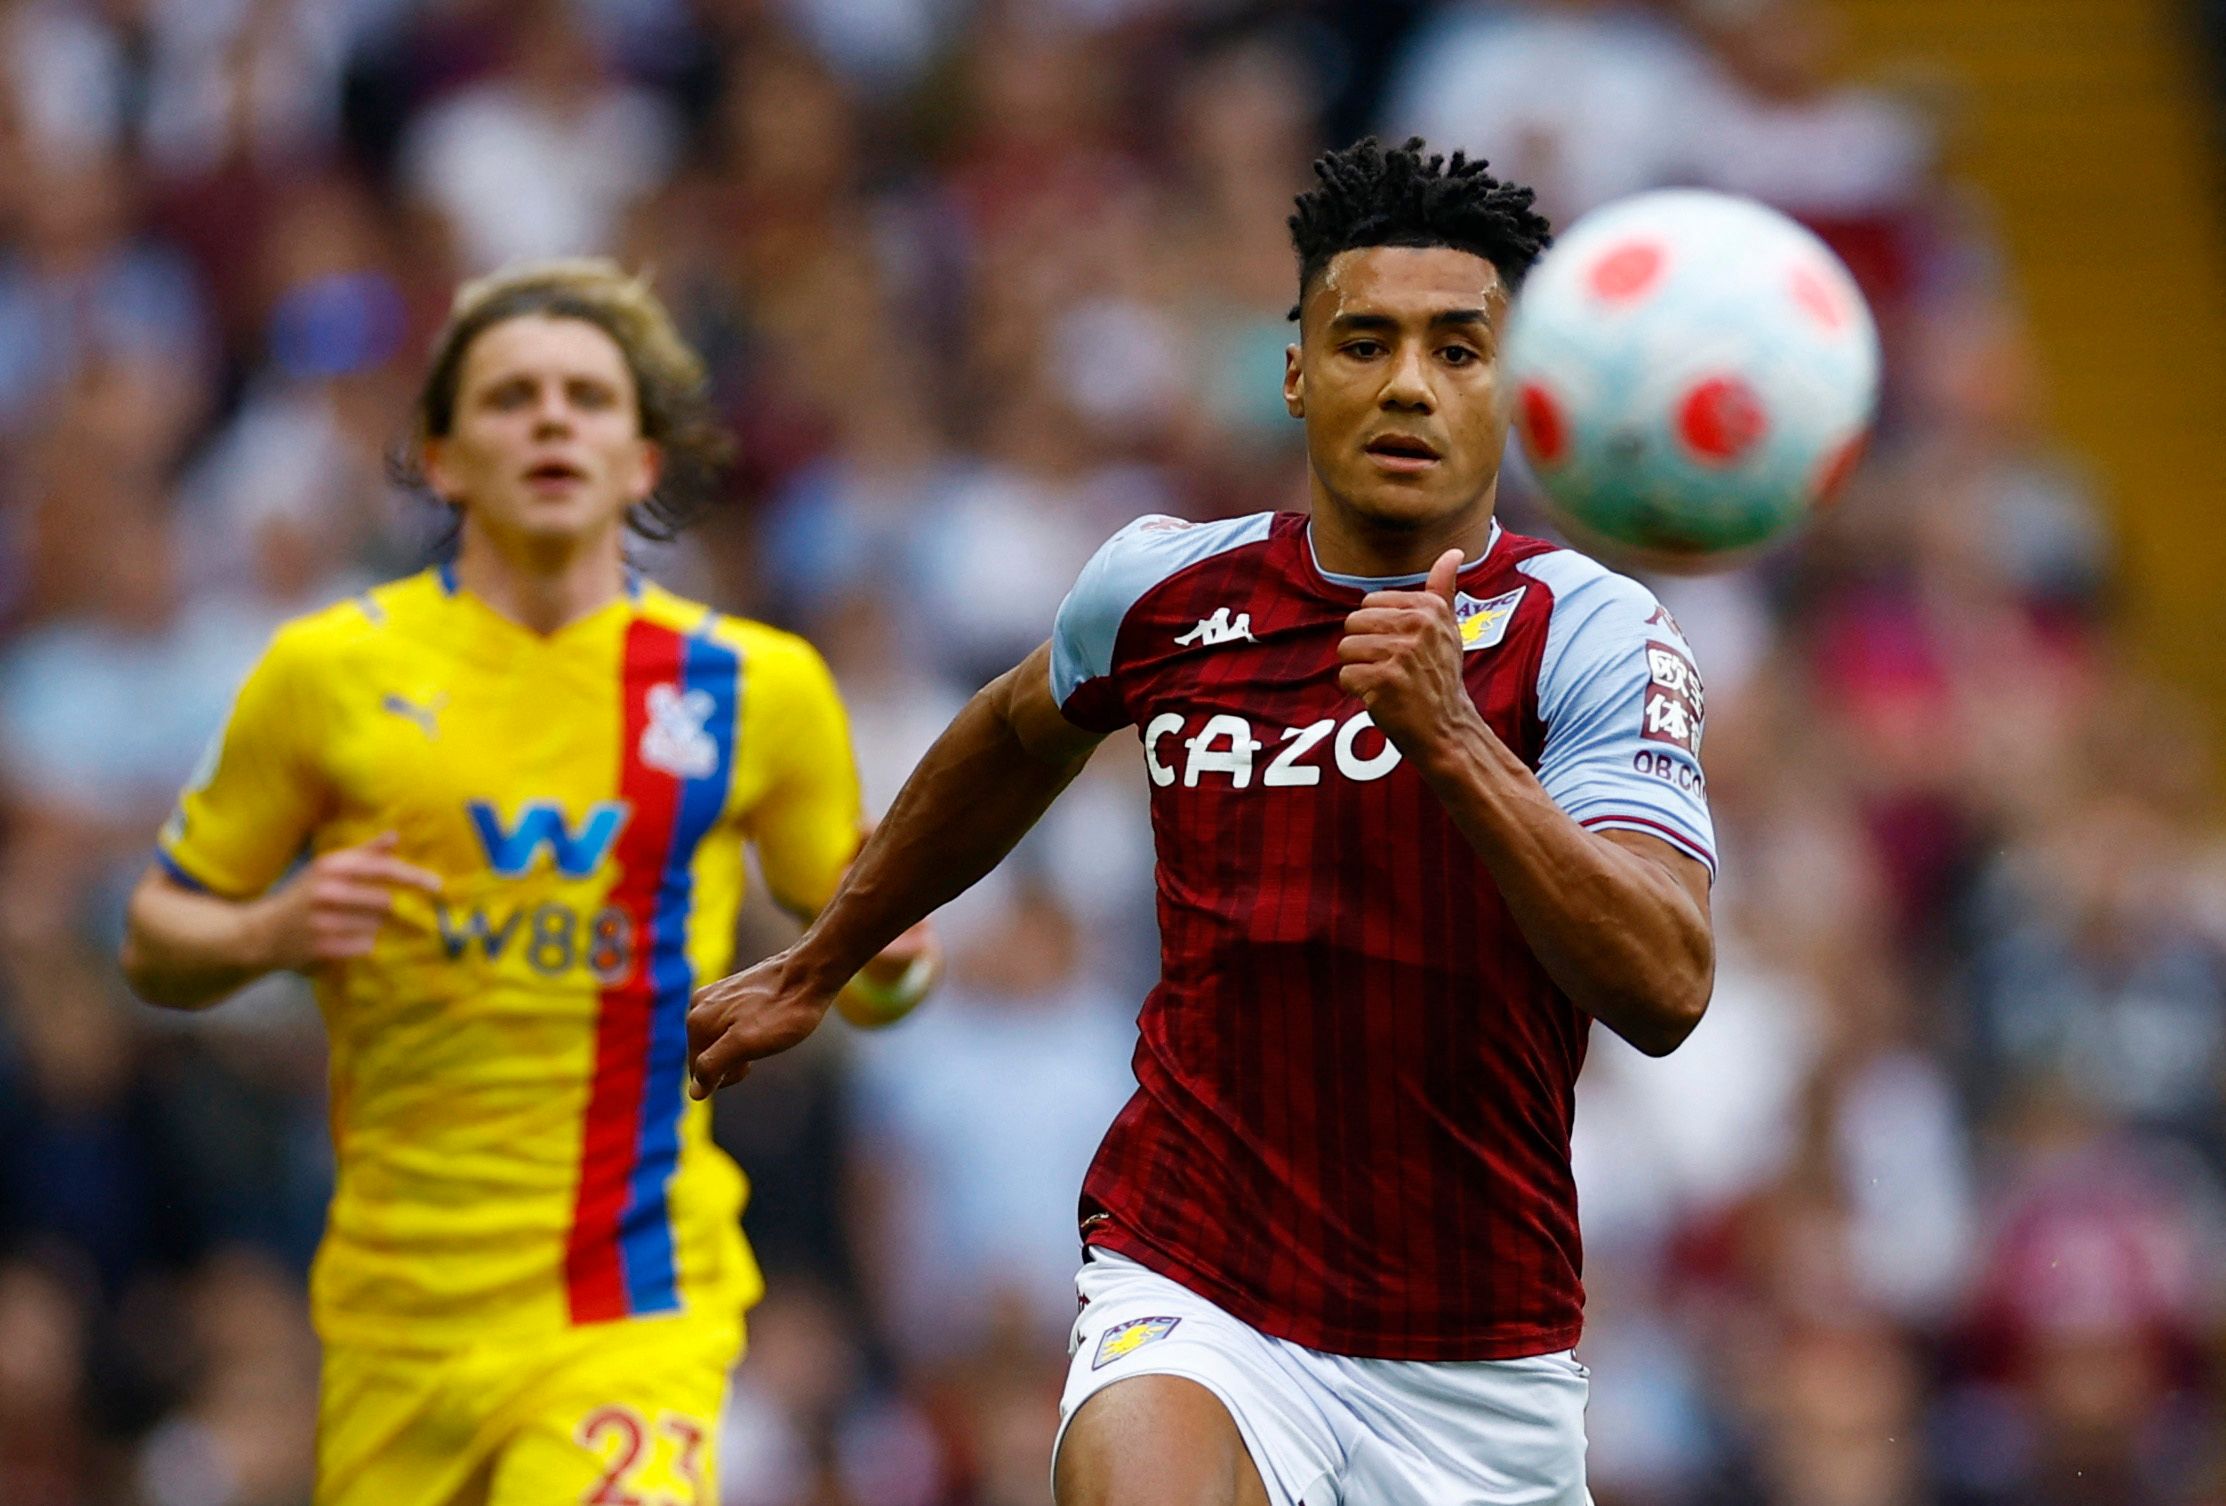 ollie-watkins-aston-villa-premier-league-west-ham-united-transfer-news-david-moyes-jarrod-bowen-latestSoccer Football - Premier League - Aston Villa v Crystal Palace - Villa Park, Birmingham, Britain - May 15, 2022 Aston Villa's Ollie Watkins in action with Crystal Palace's Conor Gallagher Action Images via Reuters/Andrew Boyers EDITORIAL USE ONLY. No use with unauthorized audio, video, data, fixture lists, club/league logos or 'live' services. Online in-match use limited to 75 images, no video 